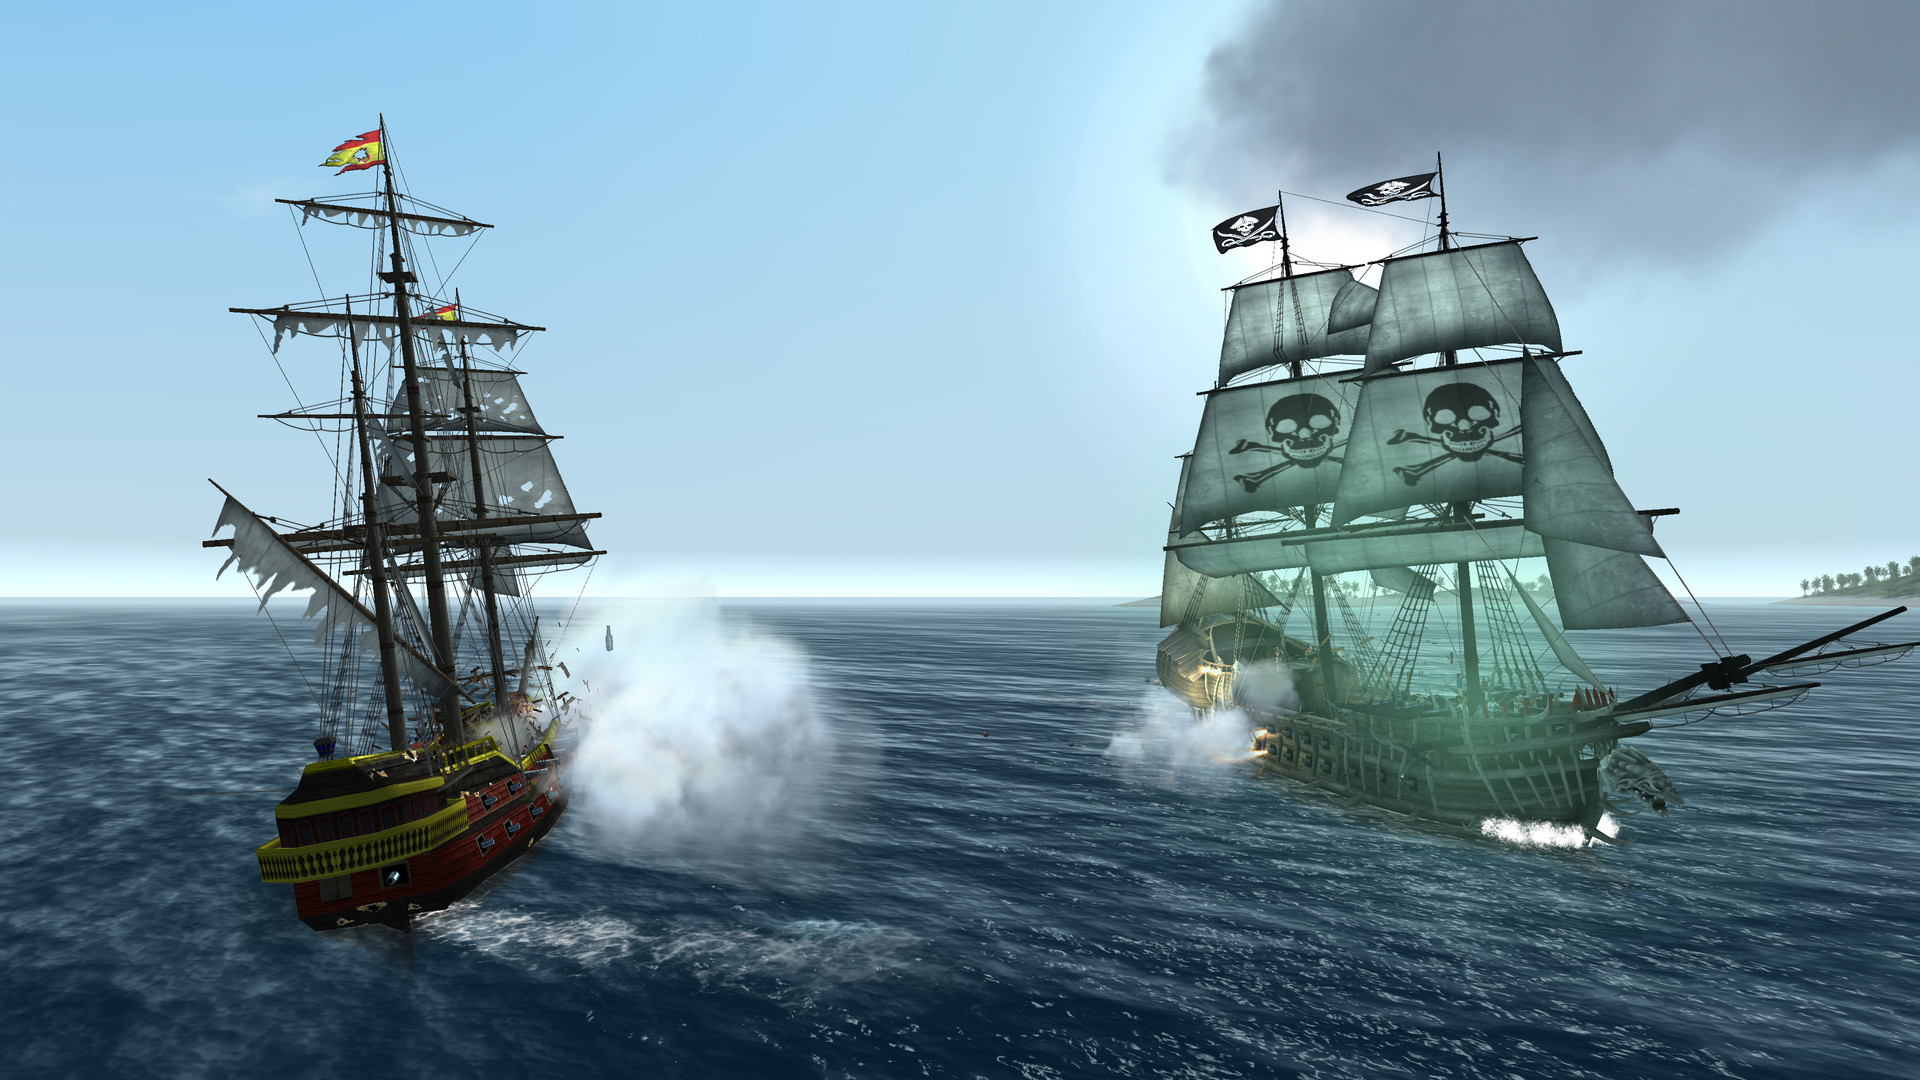 where are all the ship plans in the pirate plague of the dead